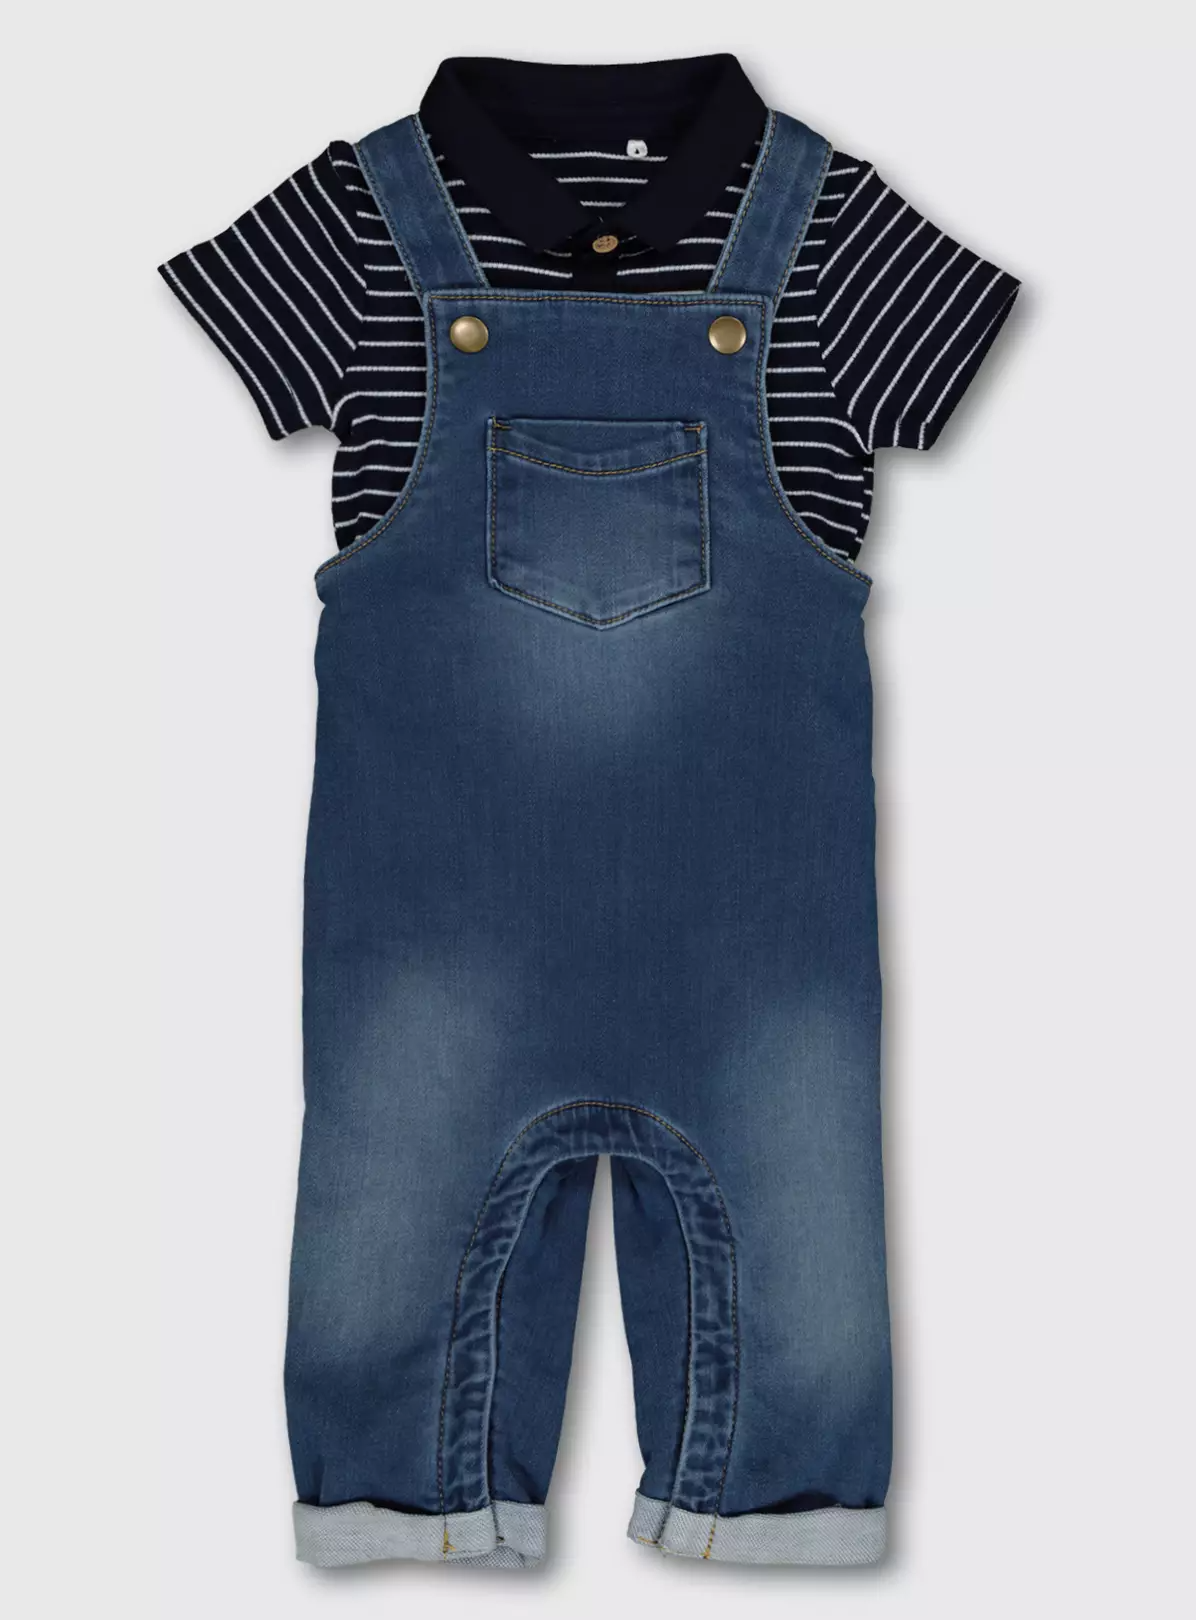 Denim Dungarees & Striped Polo Bodysuit – 9-12 months